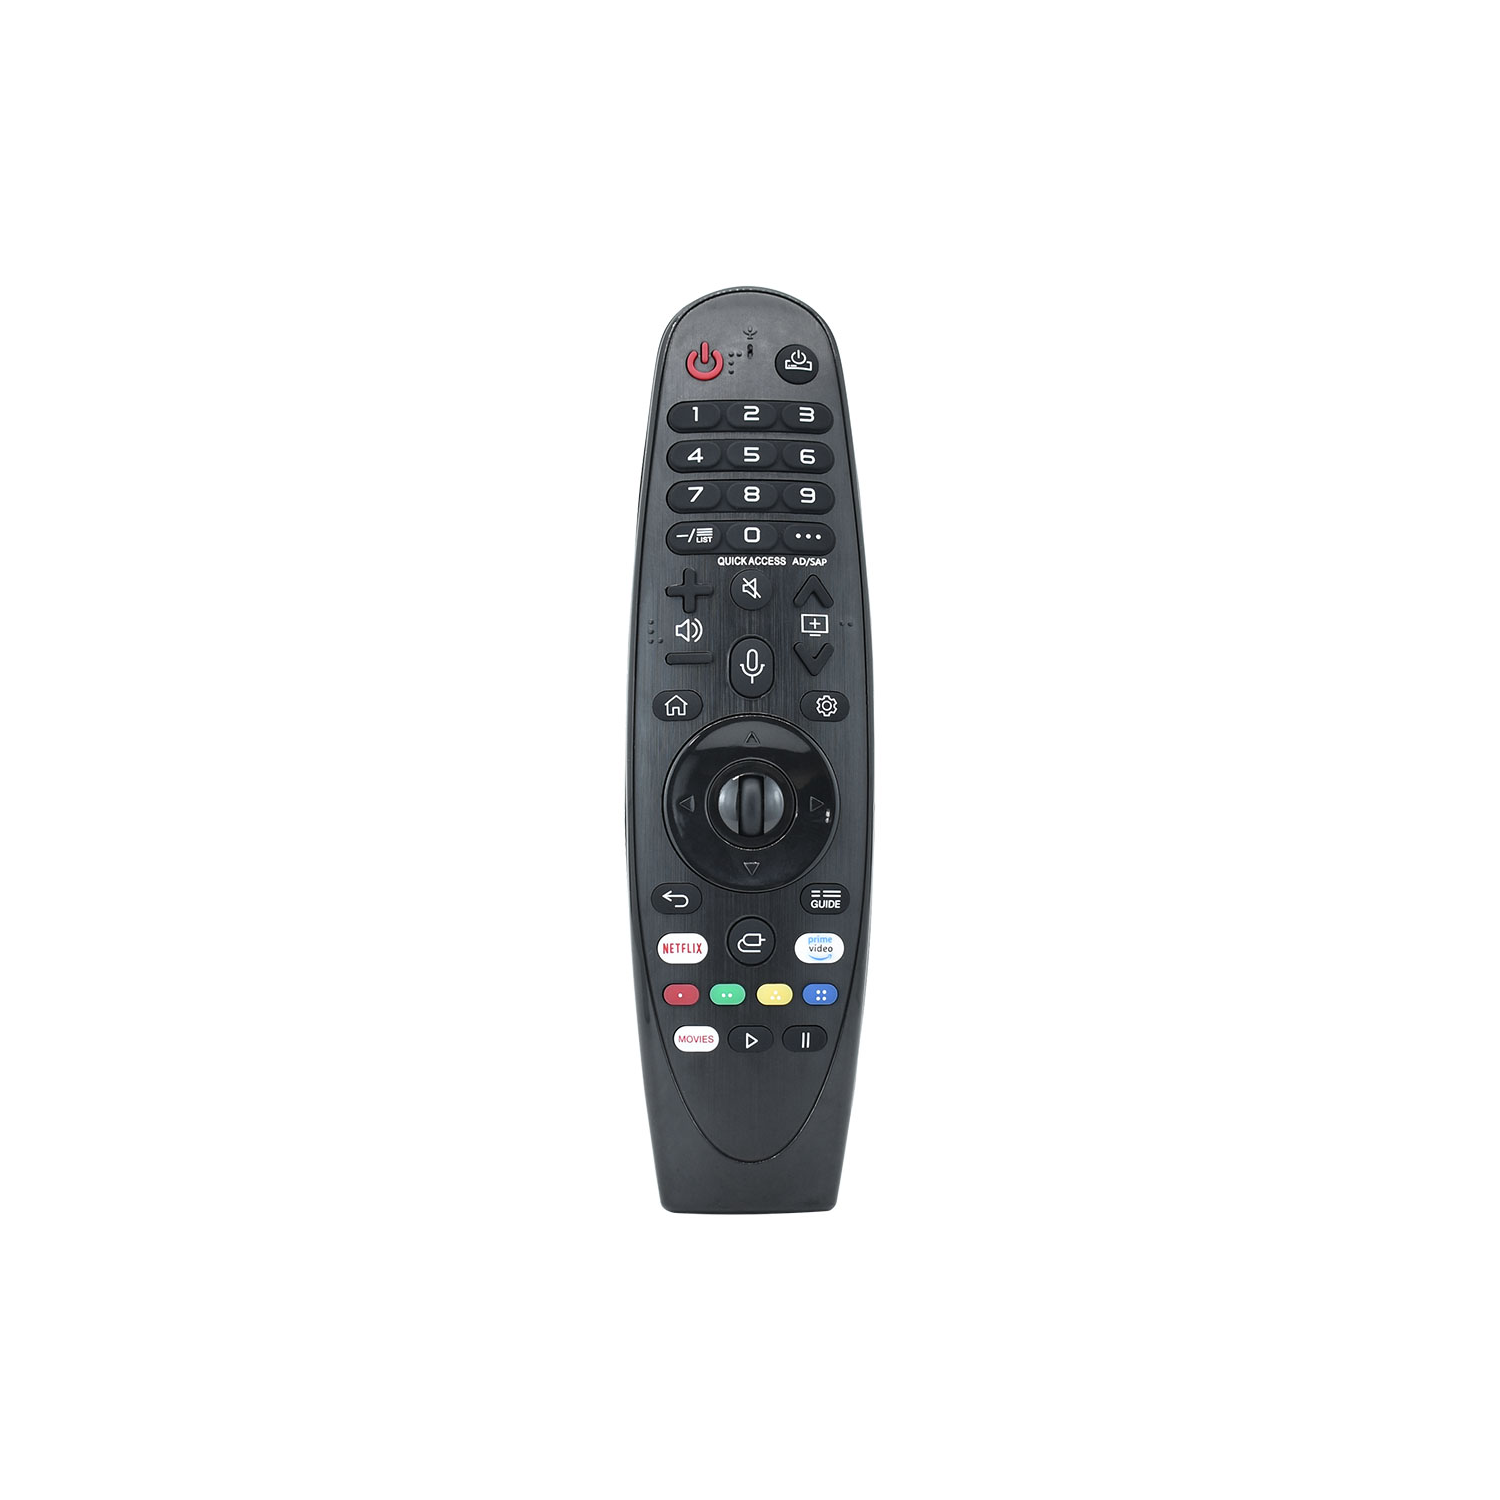 New Universal Remote Control for LG Smart TV Magic Remote AN-MR18BA AN-MR19BA AN-MR600G AN-MR650 AN-MR650G ANMR650A ANMR600 AN-MR650B Replaced Controller